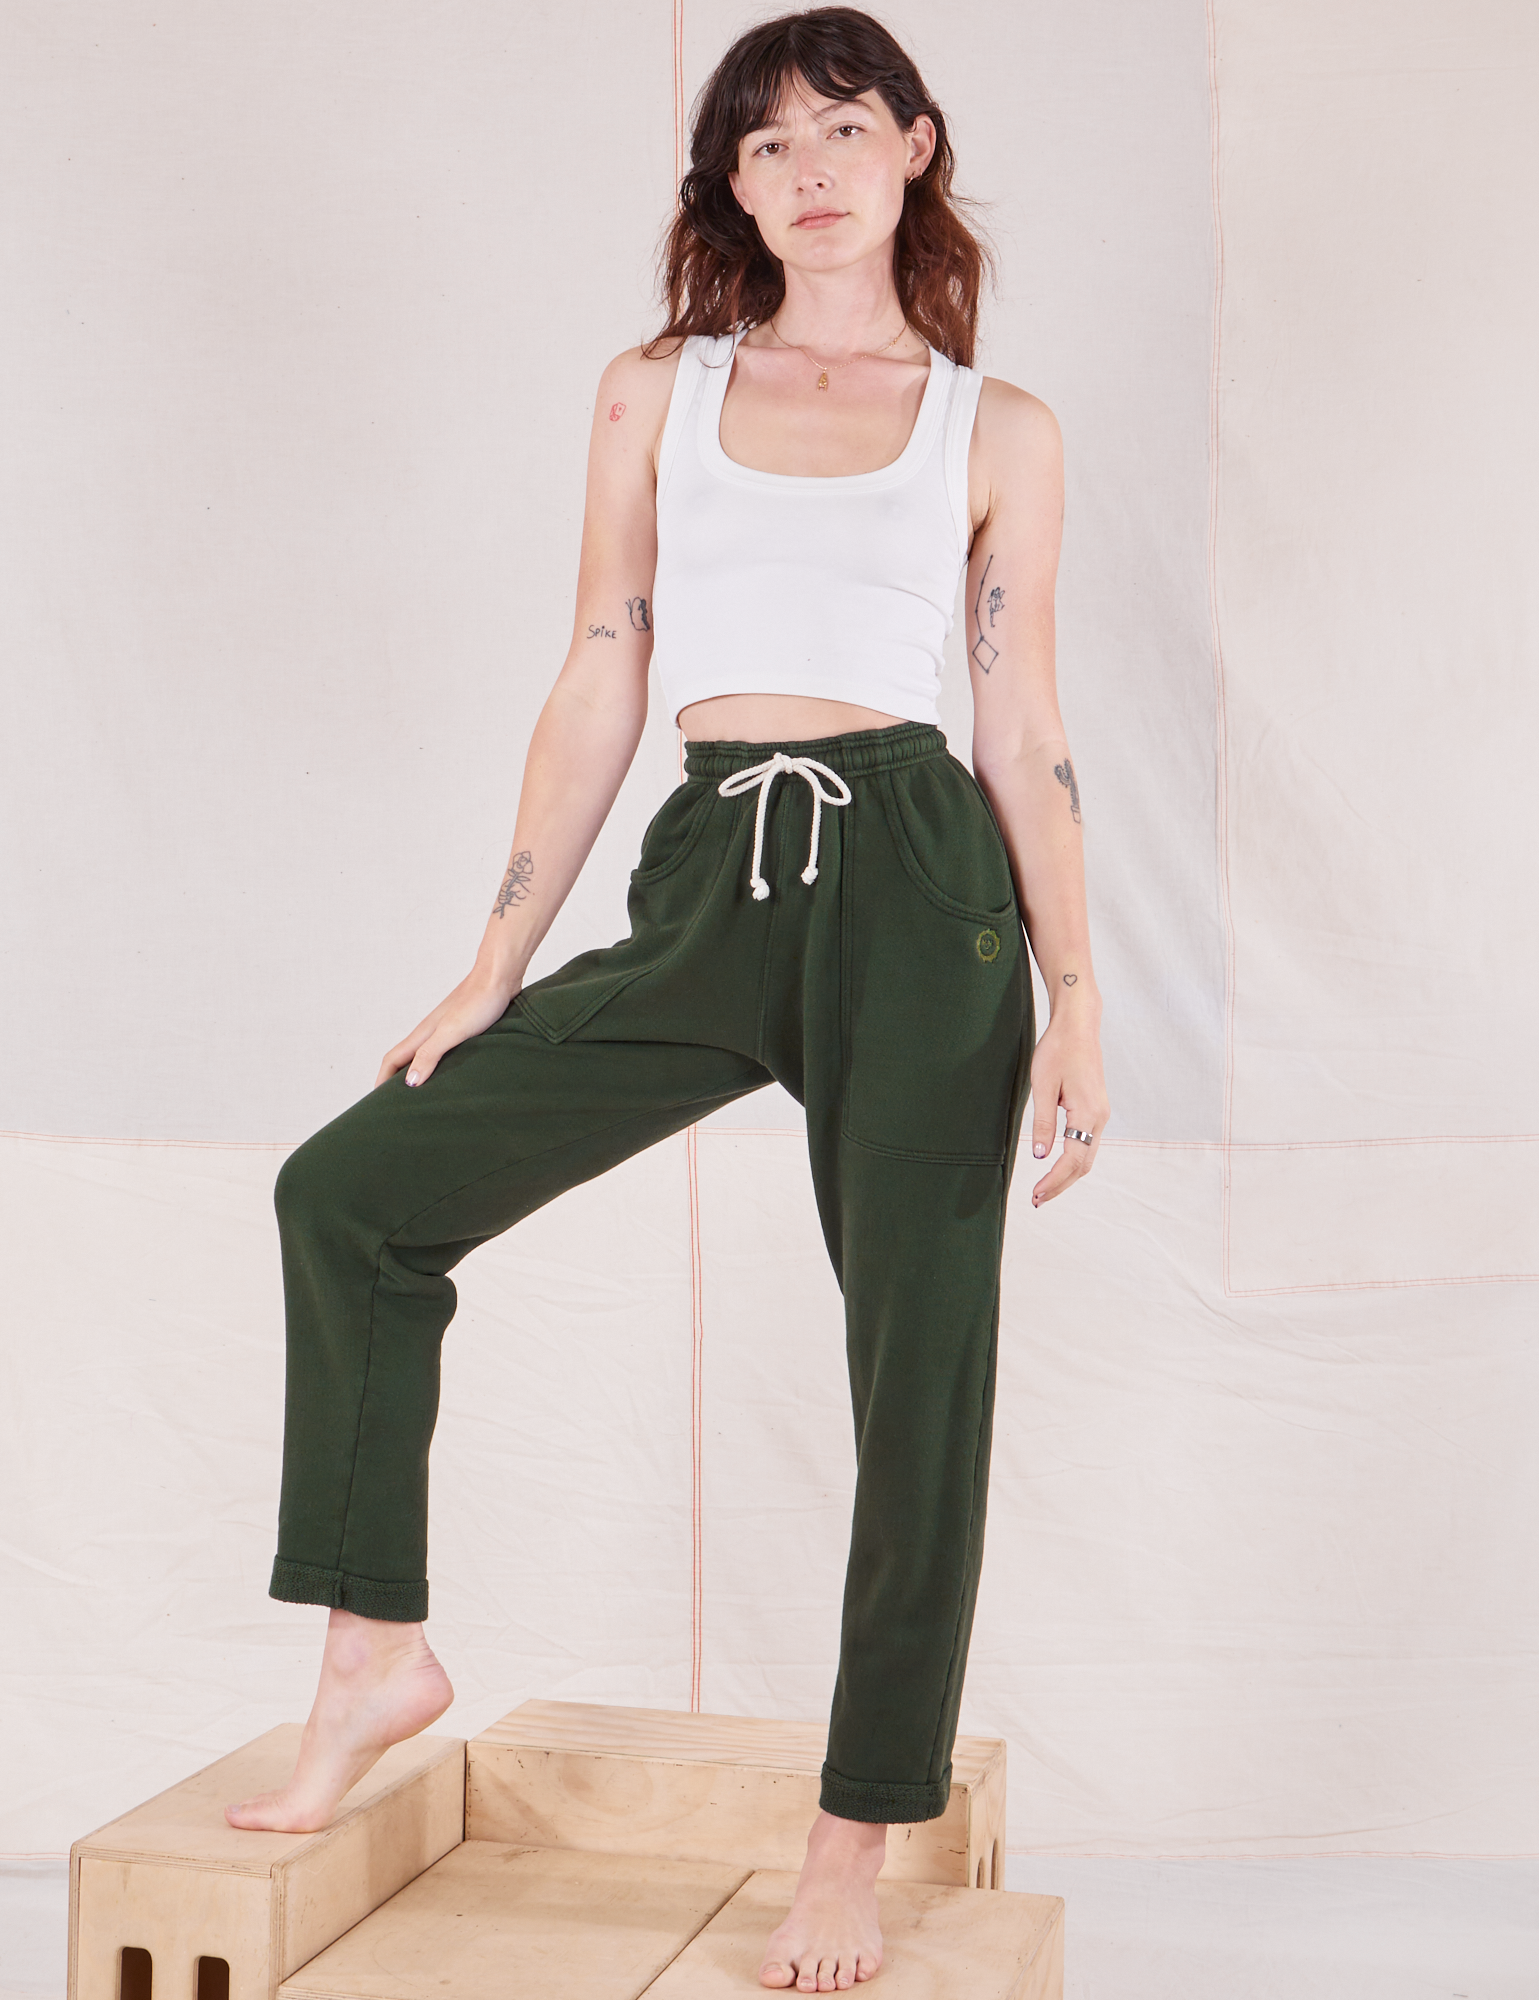 Alex is wearing Rolled Cuff Sweat Pants in Swamp Green and Cropped Tank in vintage tee off-white